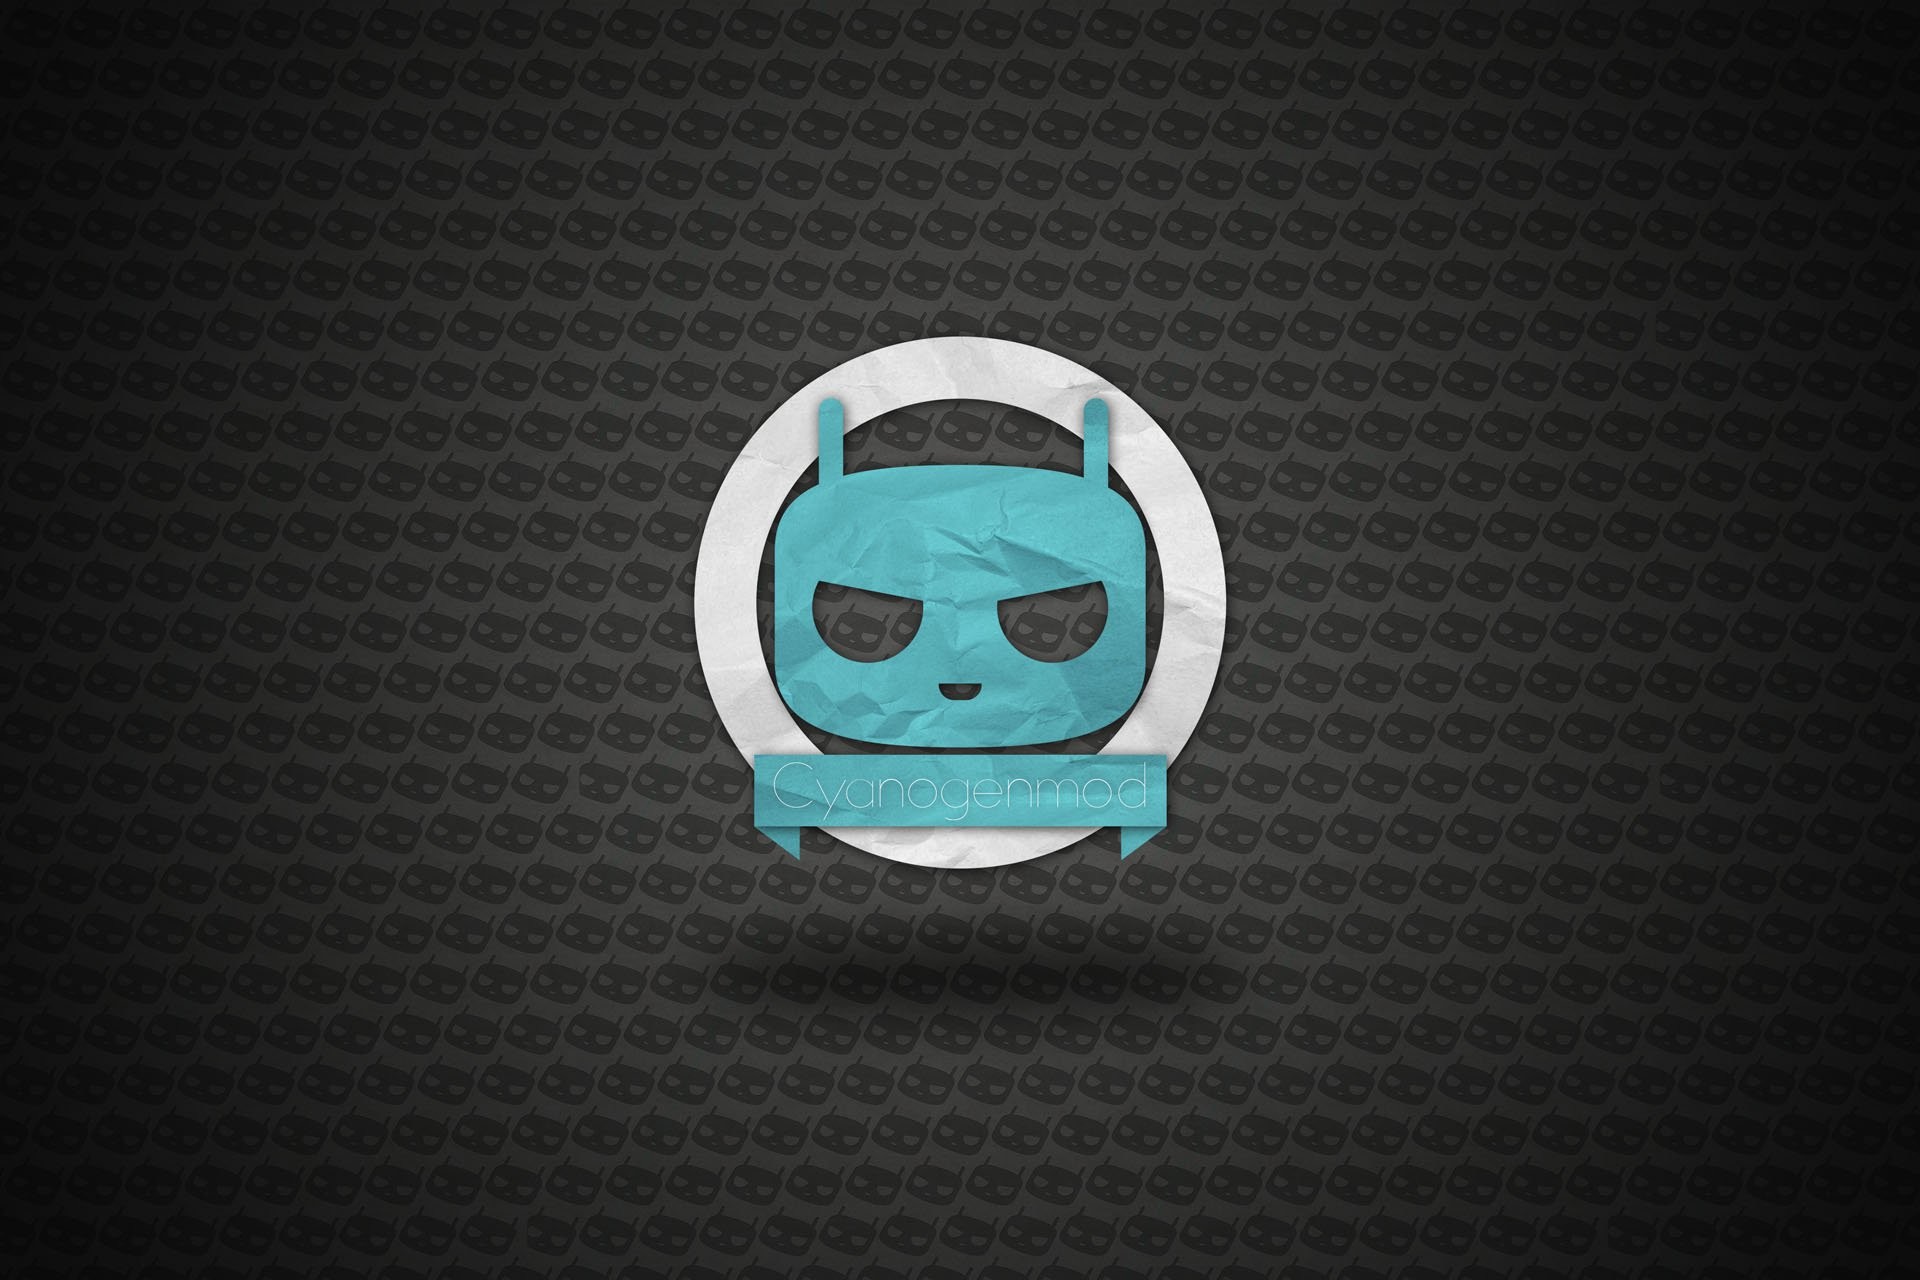 1920x1280 Try these CyanogenMod wallpapers to liven up your custom Android experience